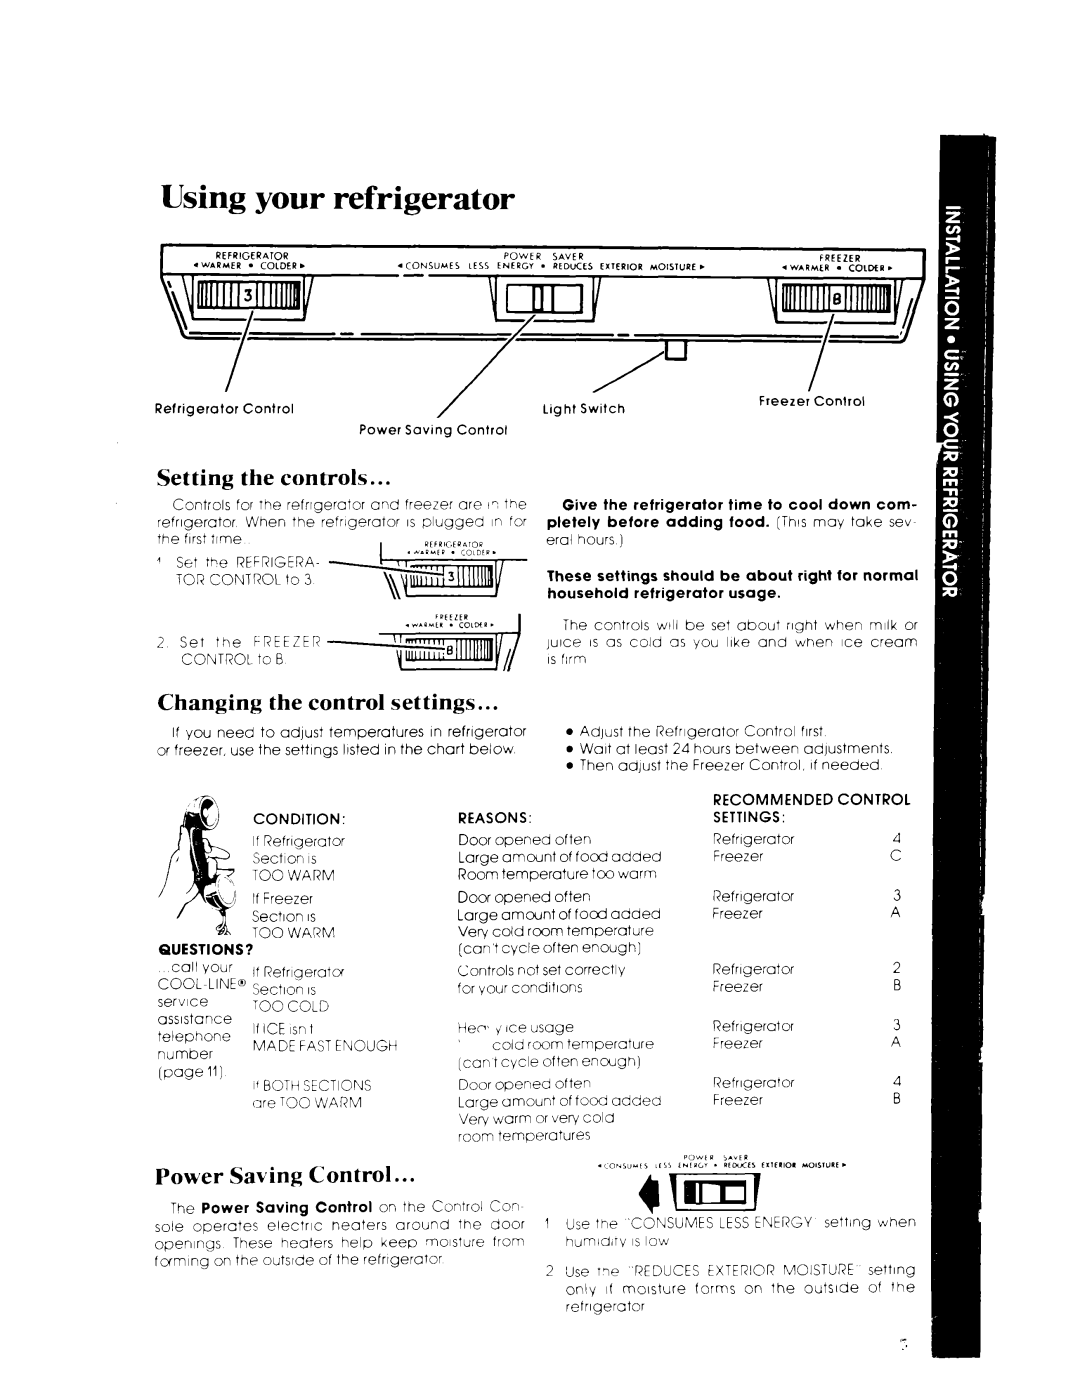 Whirlpool ET1NK Using your refrigerator, Setting the controls, Changing the control settings, Power Saving Control, page 